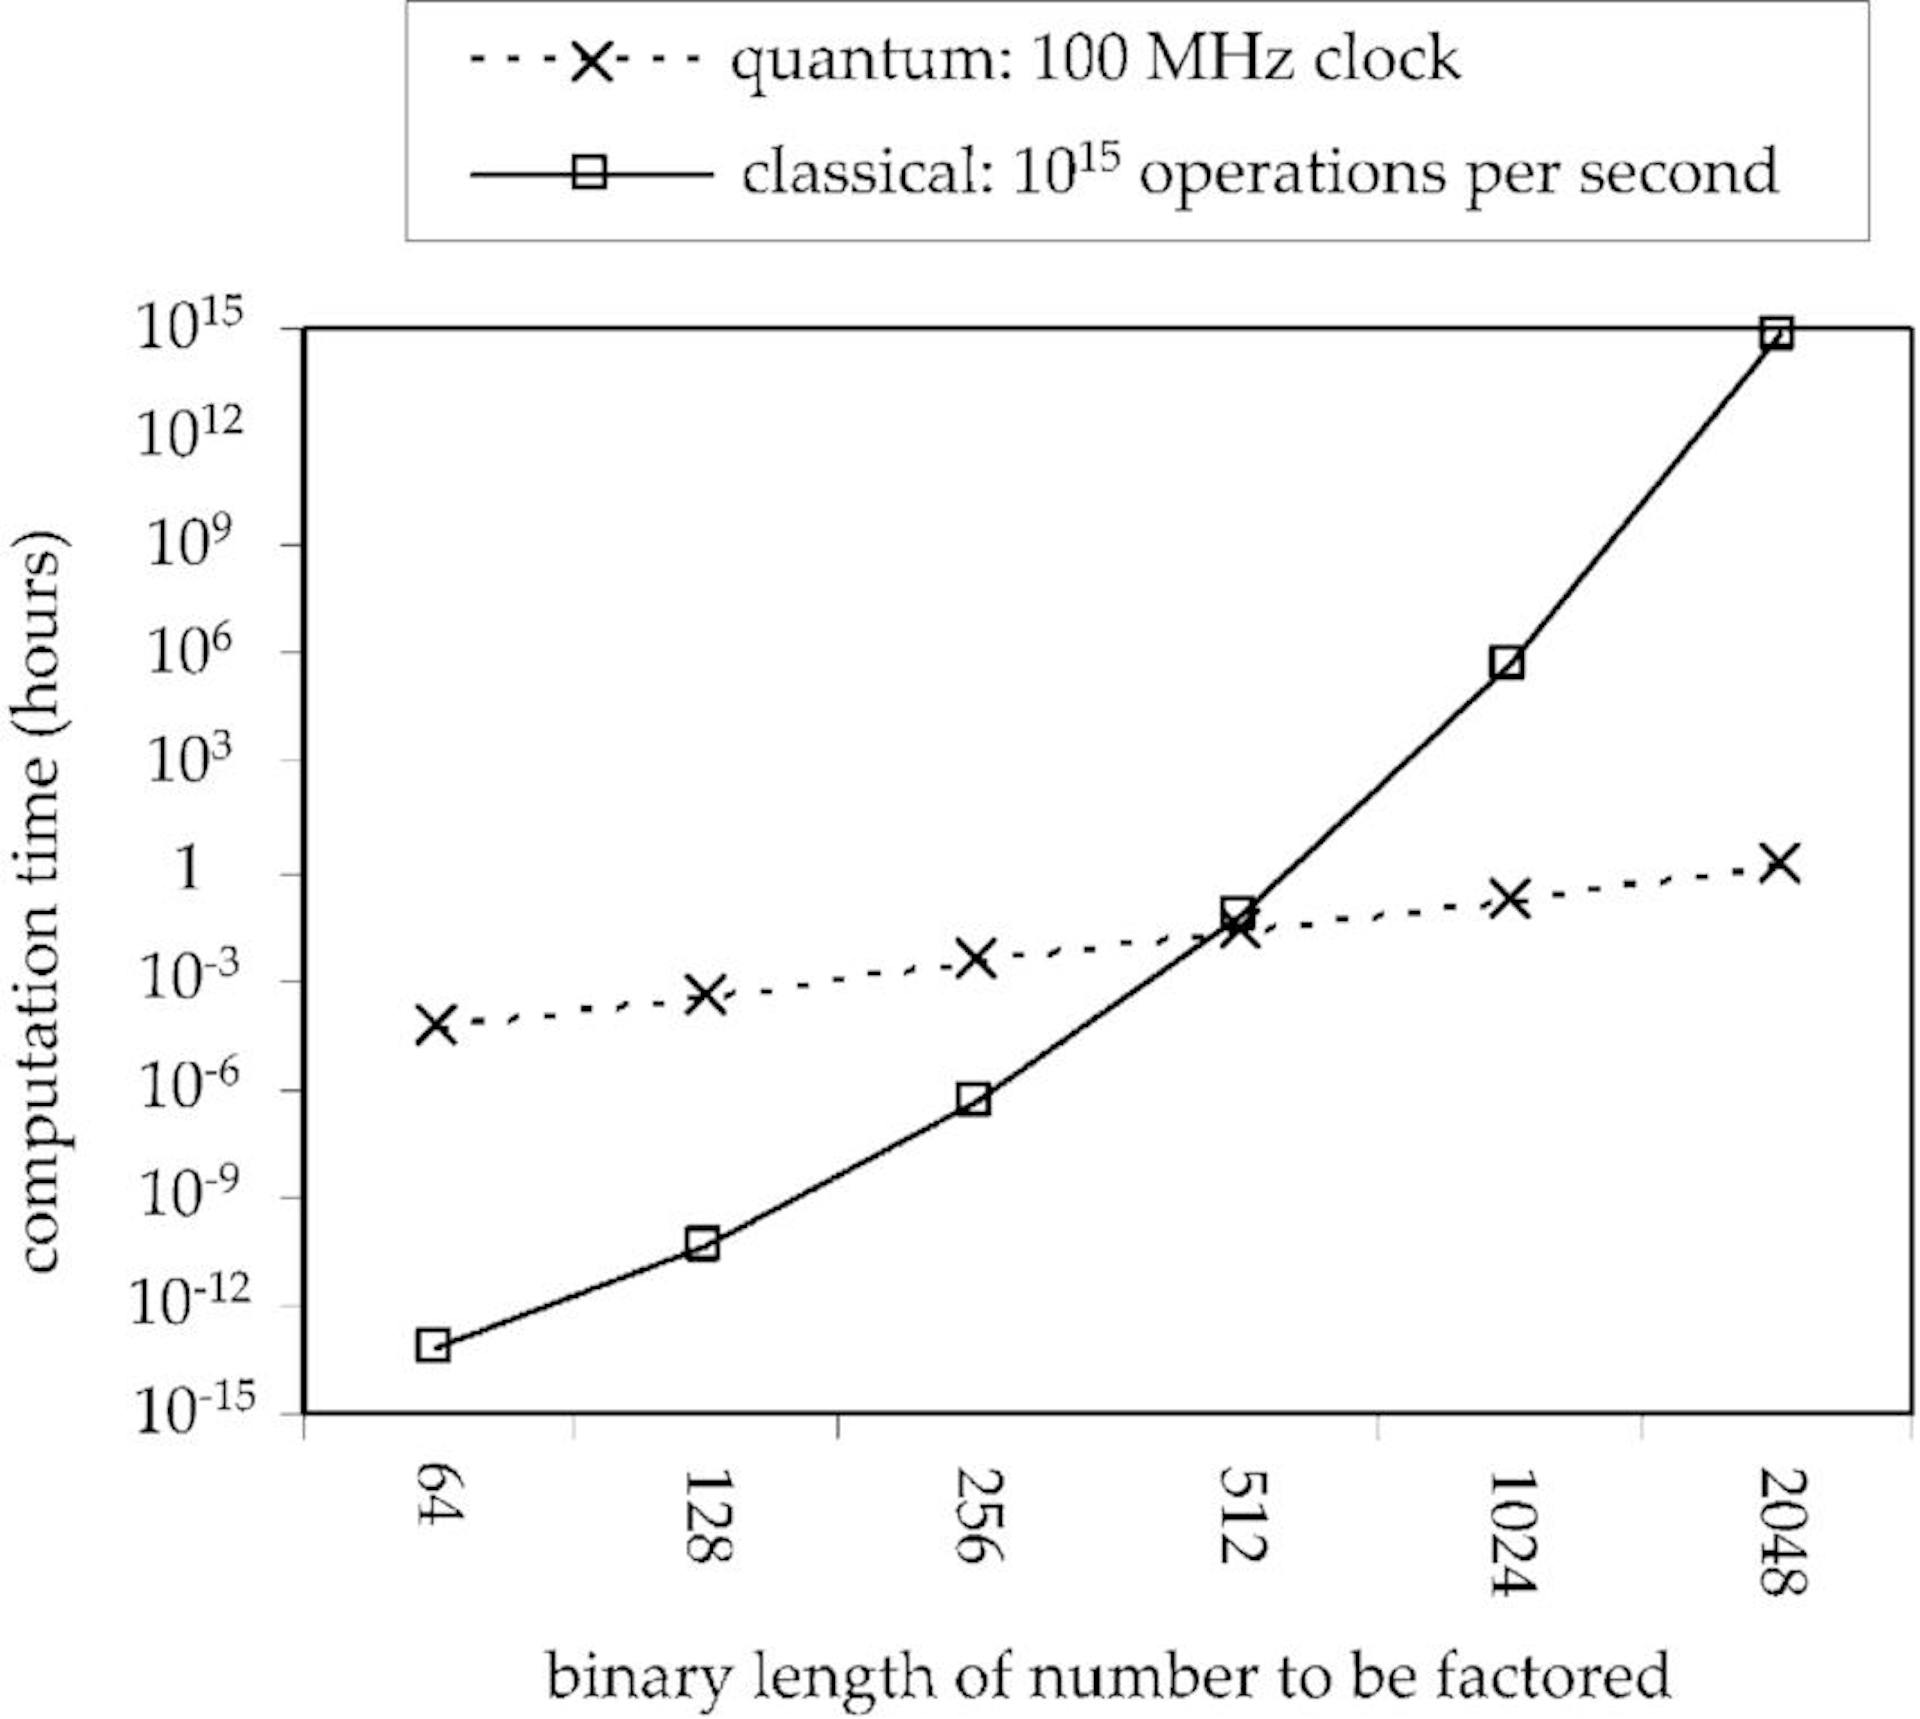 Fuente: https://www.researchgate.net/figure/Comparison-of-estimated-computation-time-in-hours-for-the-problem-of-factoring-numbers-of_fig1_2986358